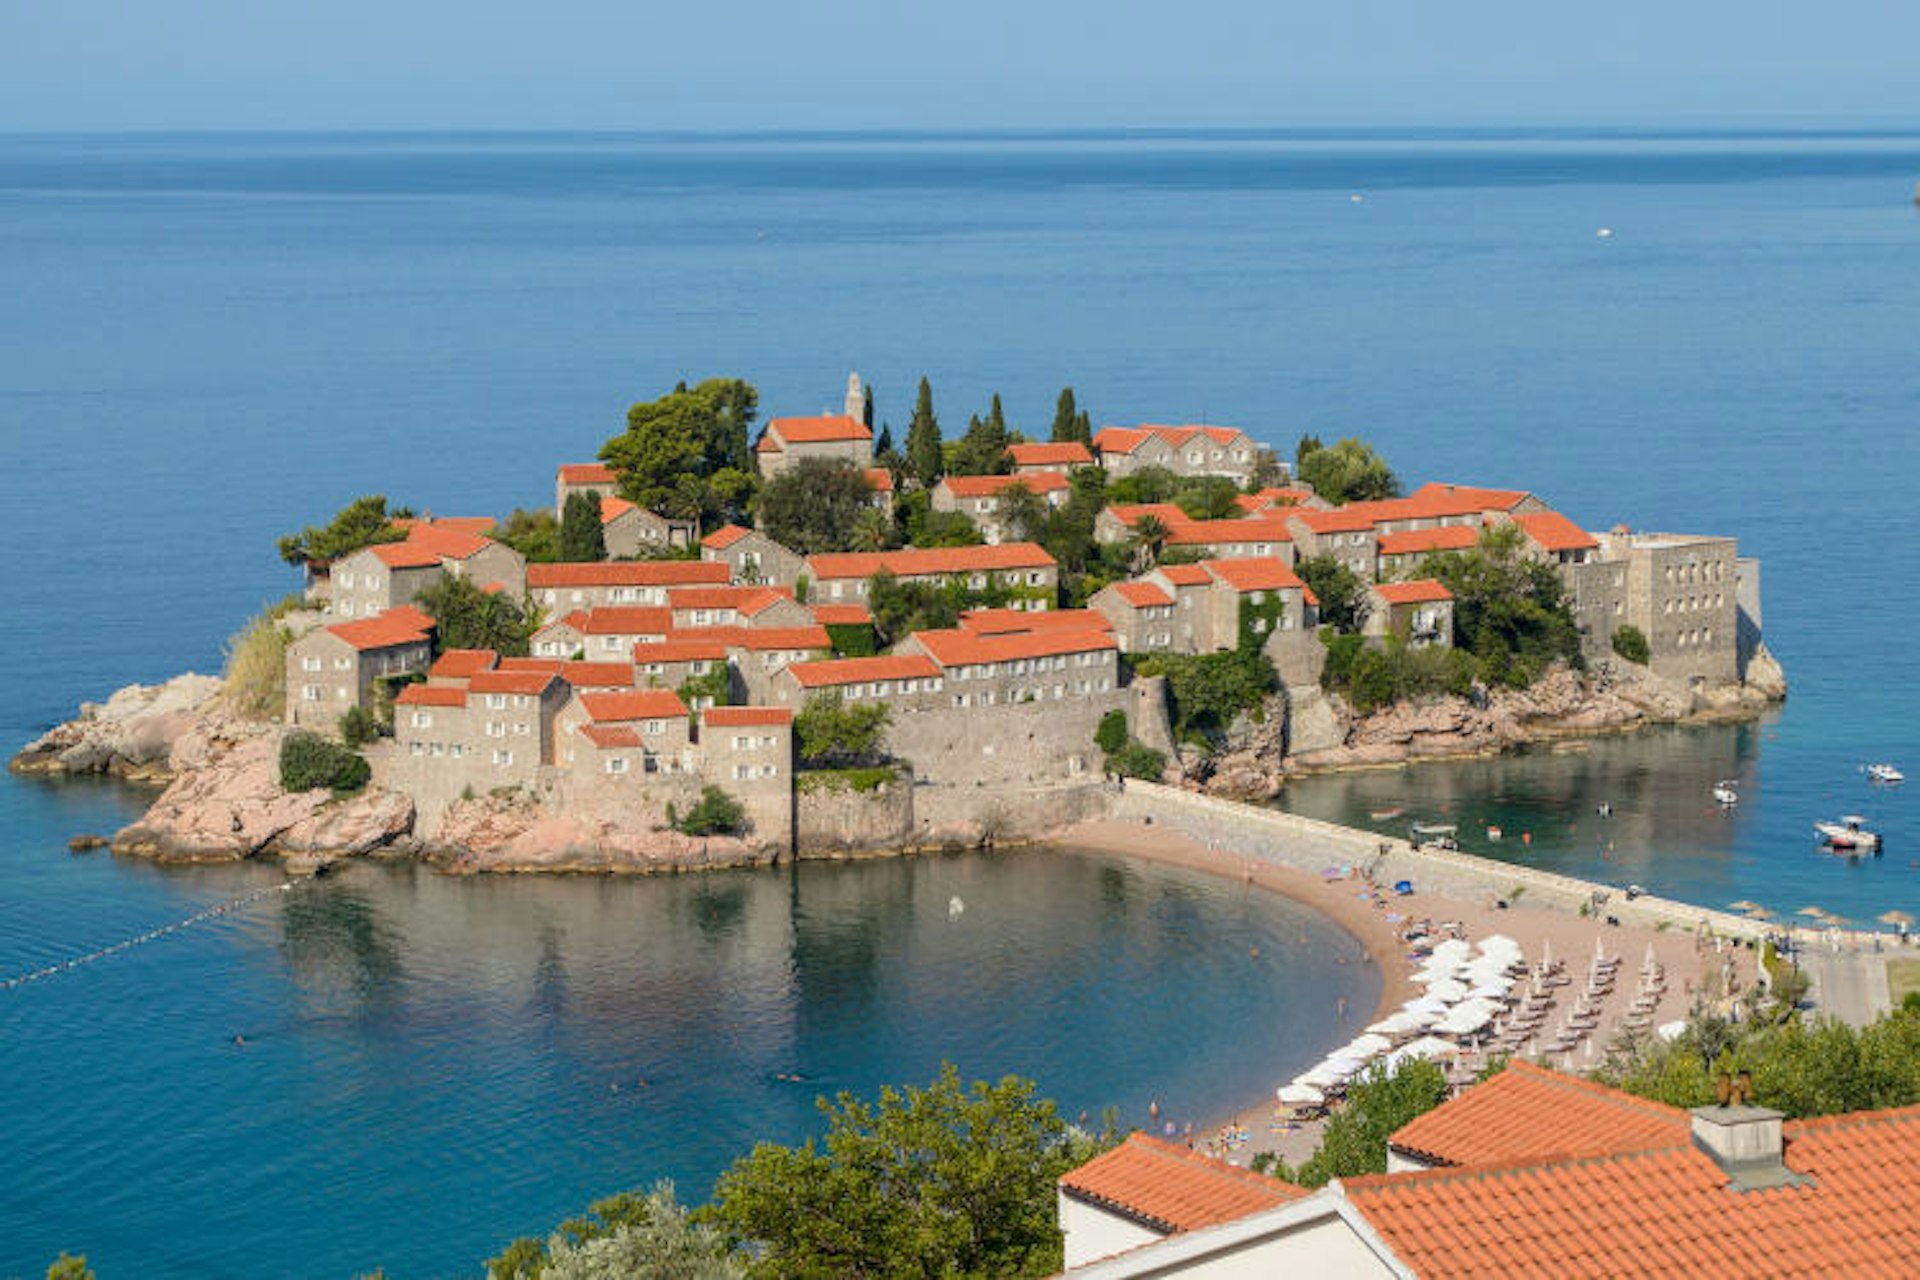 Sveti Stefan island resort. Image by ecl1ght / CC BY 2.0